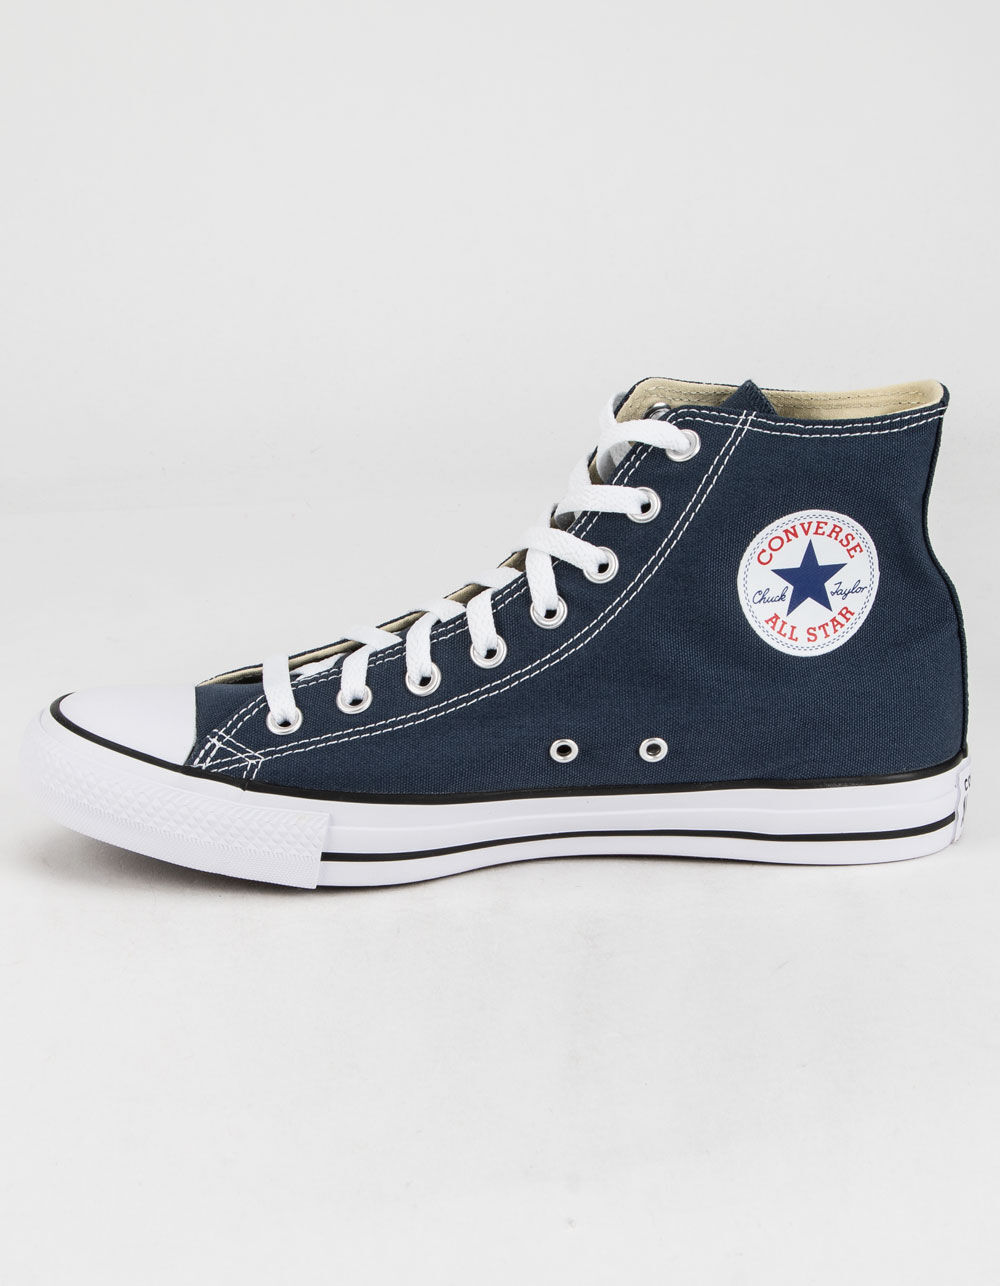 Father Heir casualties CONVERSE Chuck Taylor All Star Navy High Top Shoes - NAVY | Tillys